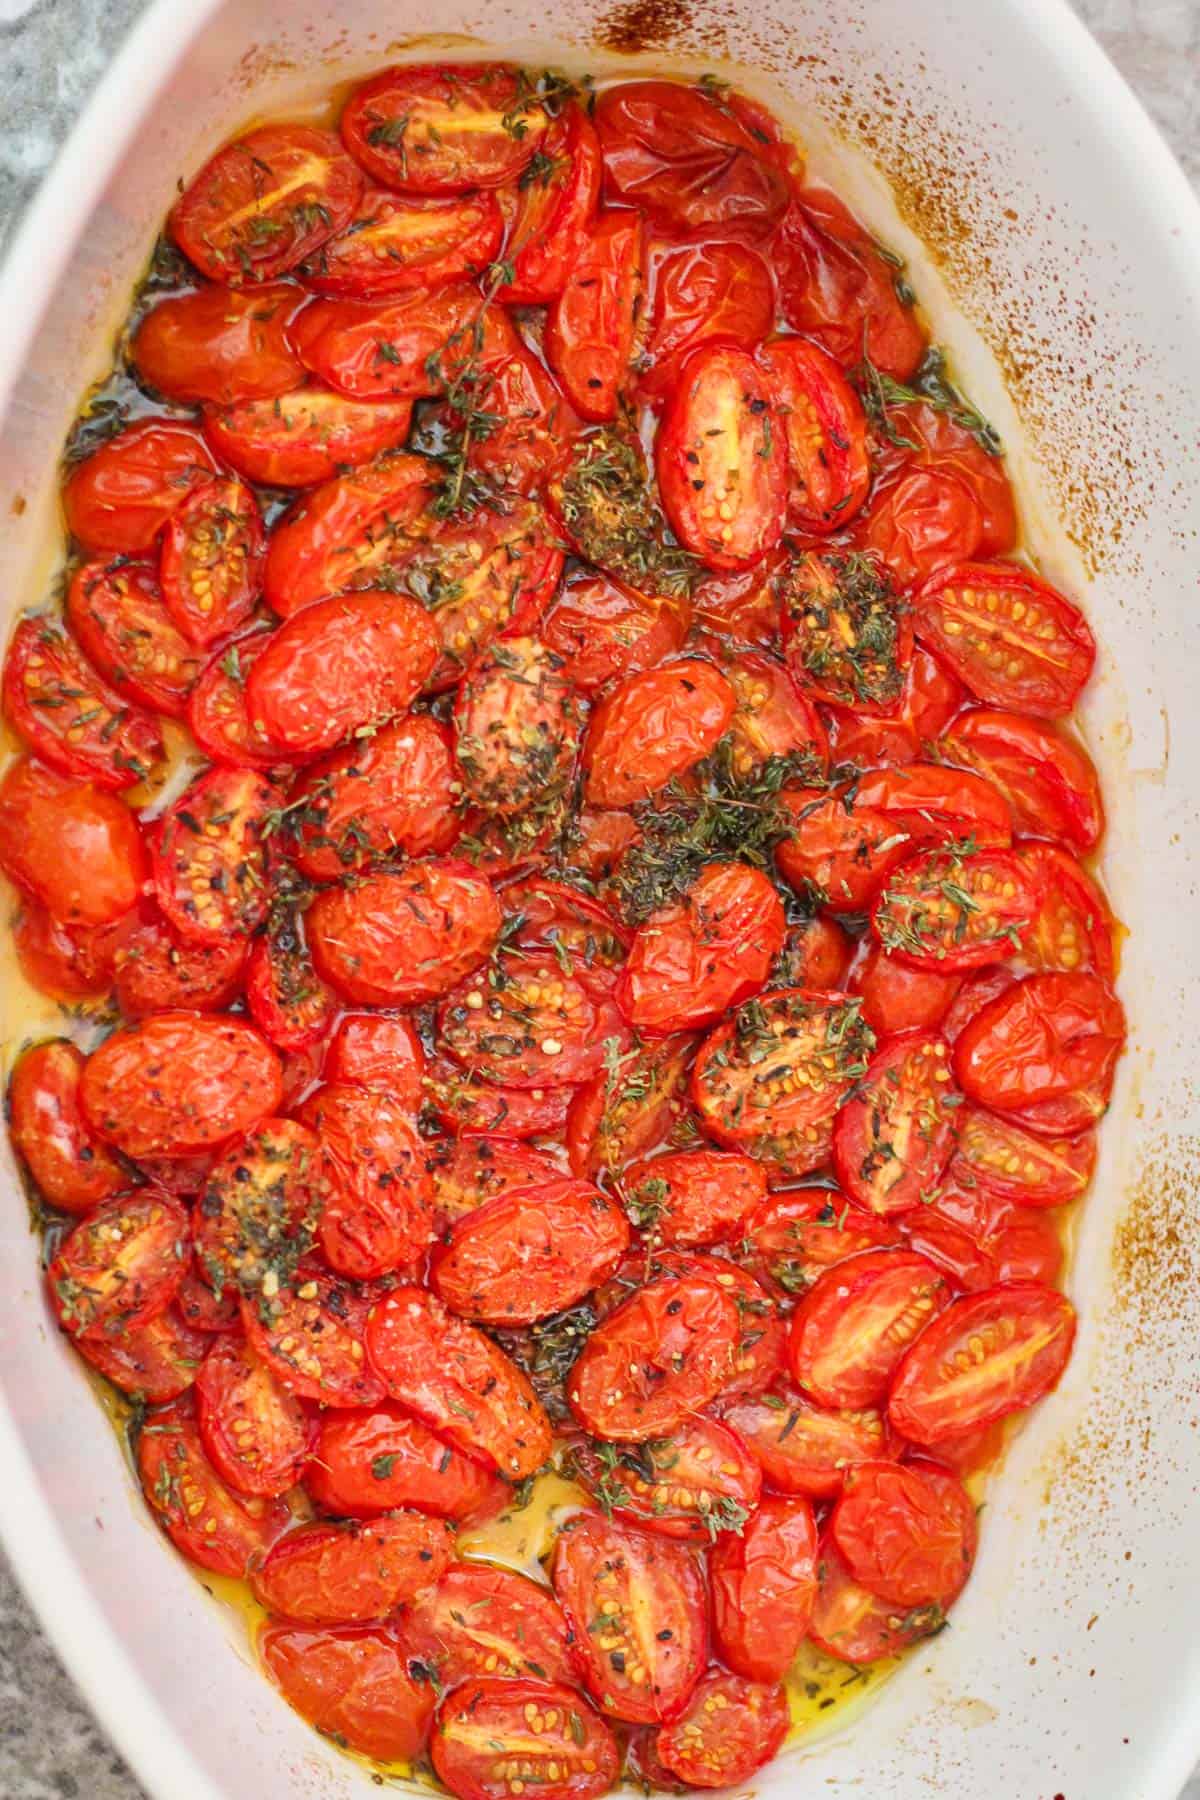 Roasted grape tomatoes, halved with lots of seasonings. Tomatoes are still in a baking tray.